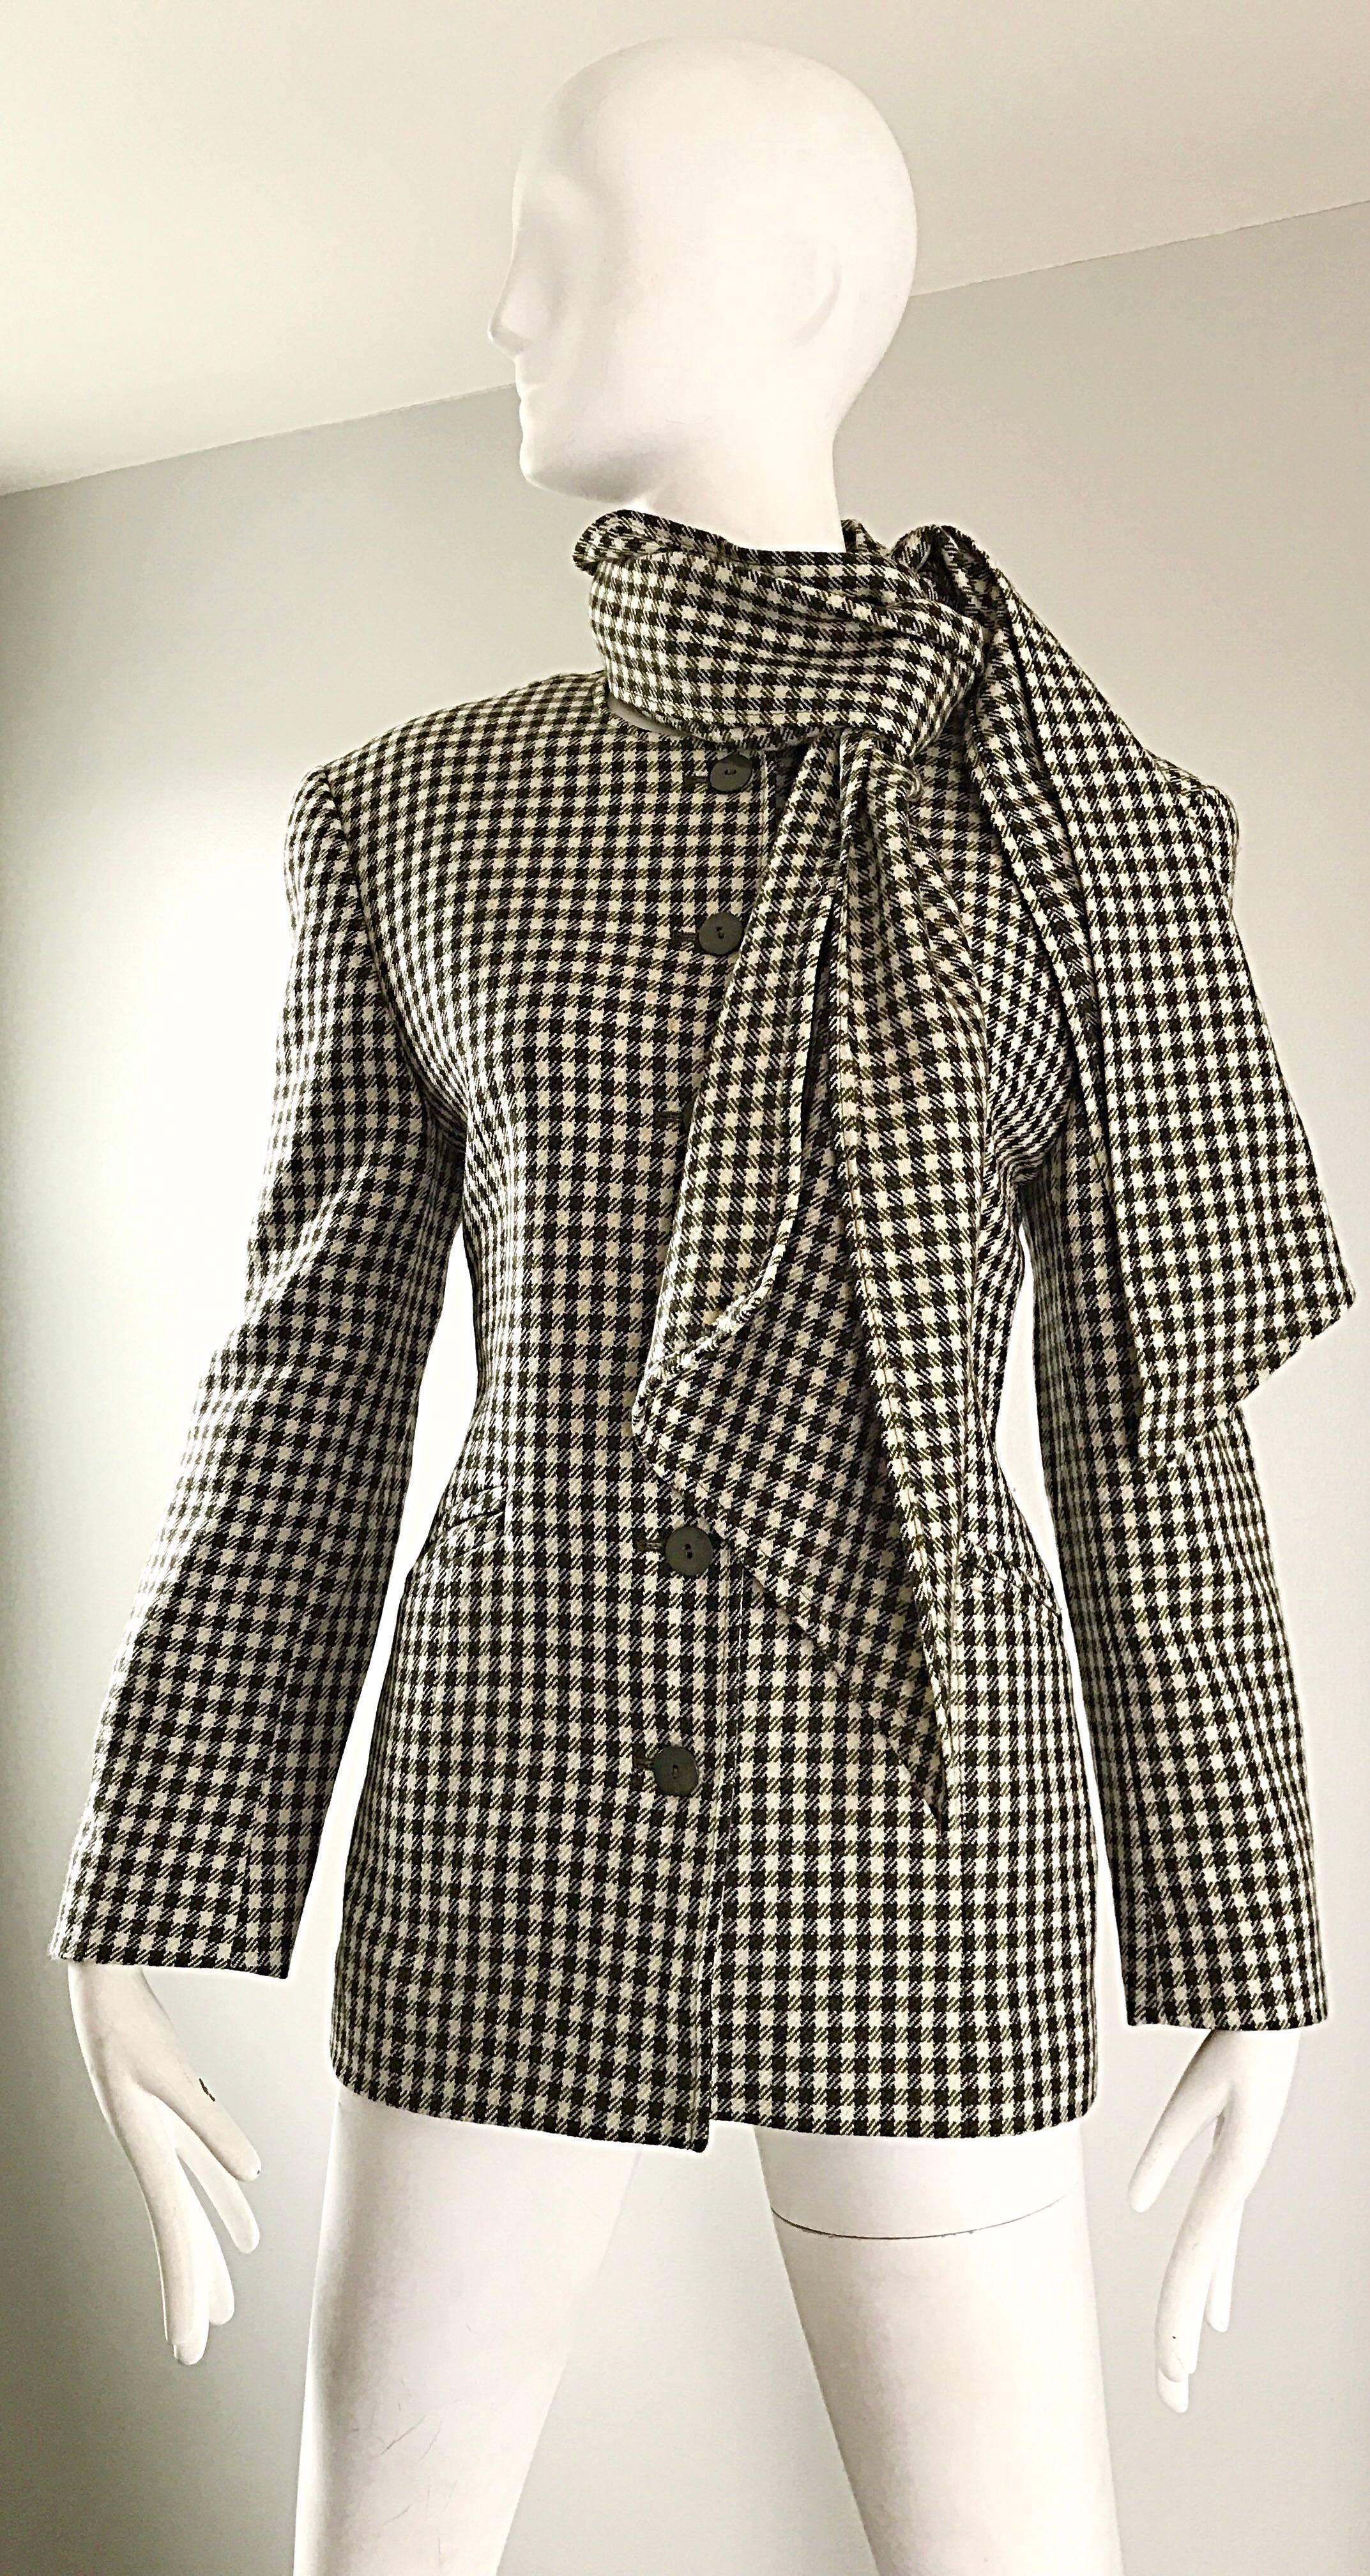 Chic 90s vintage ESCADA by MARGARETHA LEY forest green and ivory houndstooth checkered blazer jacket, and matching scarf! Green buttons up the front of the jacket. Pocket at each side of the waist. Smart tailored slim fit. Fully lined. 100% virgin